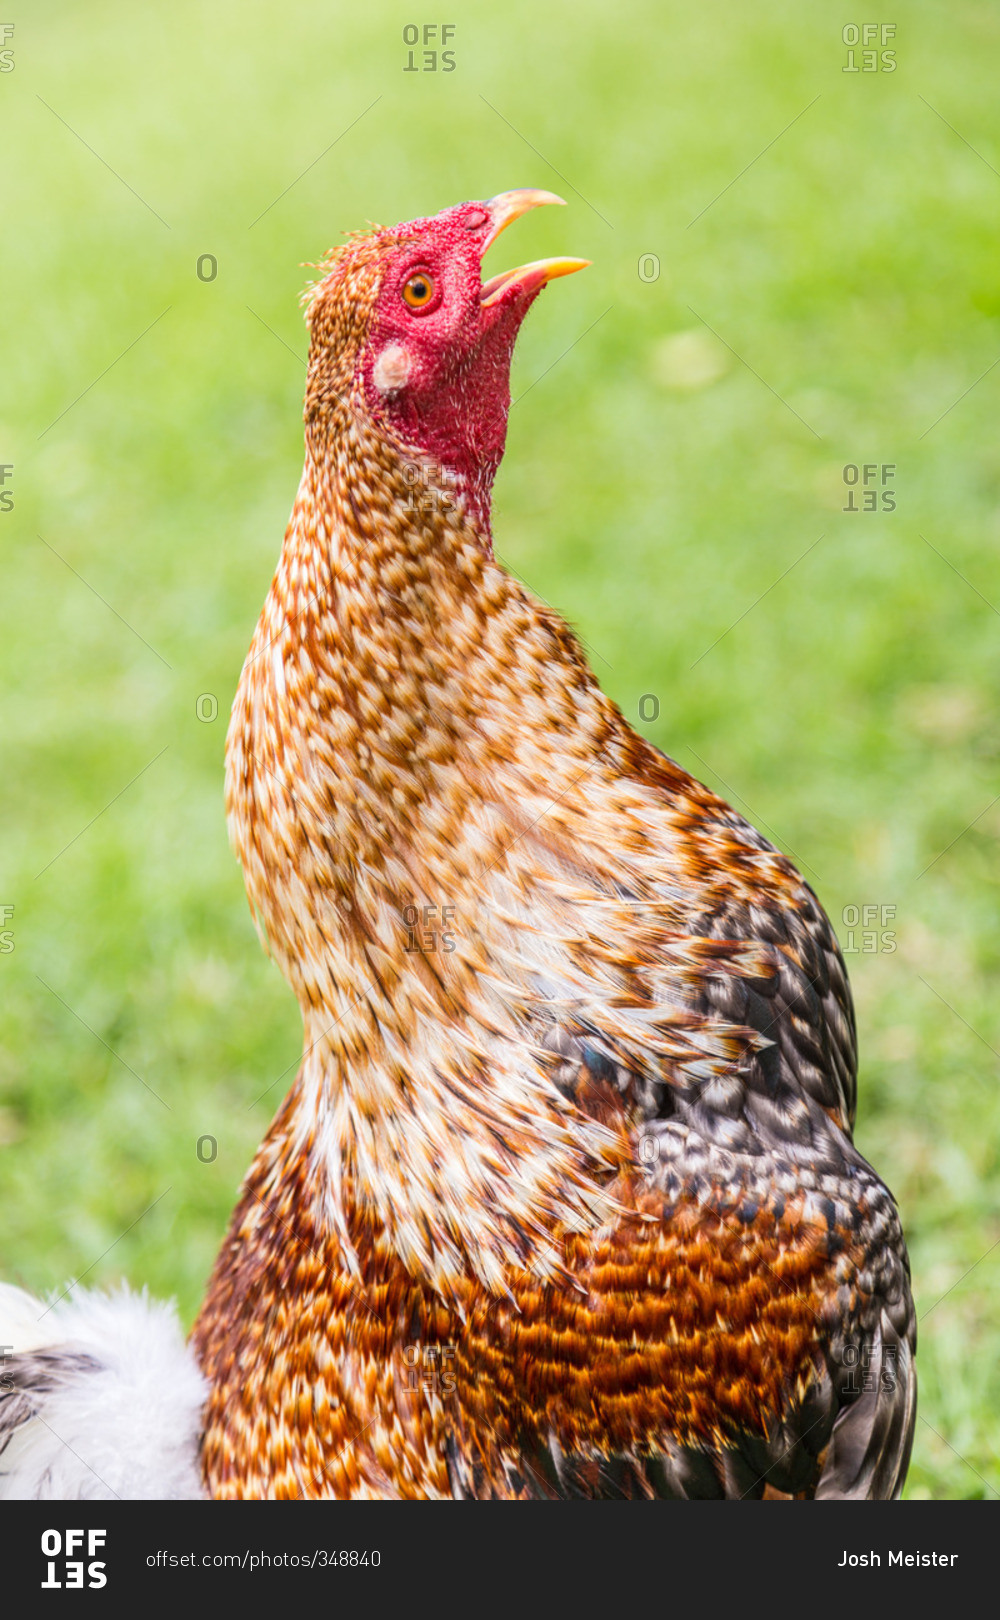 Crowing speckled rooster in Philippines